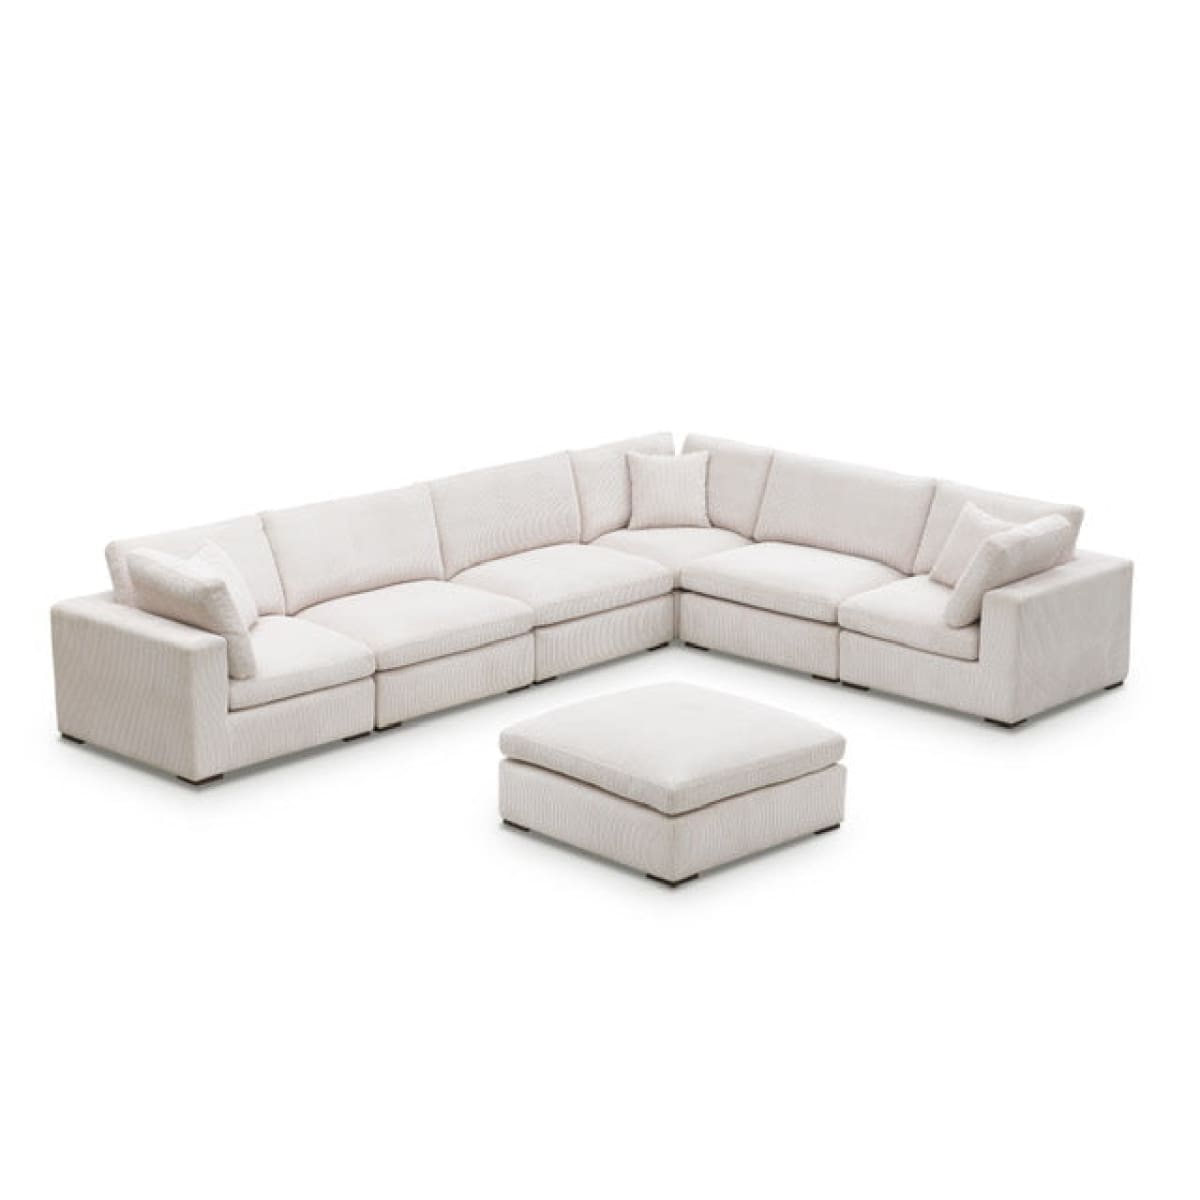 Claire 5pc Modular Sectional - Sectional